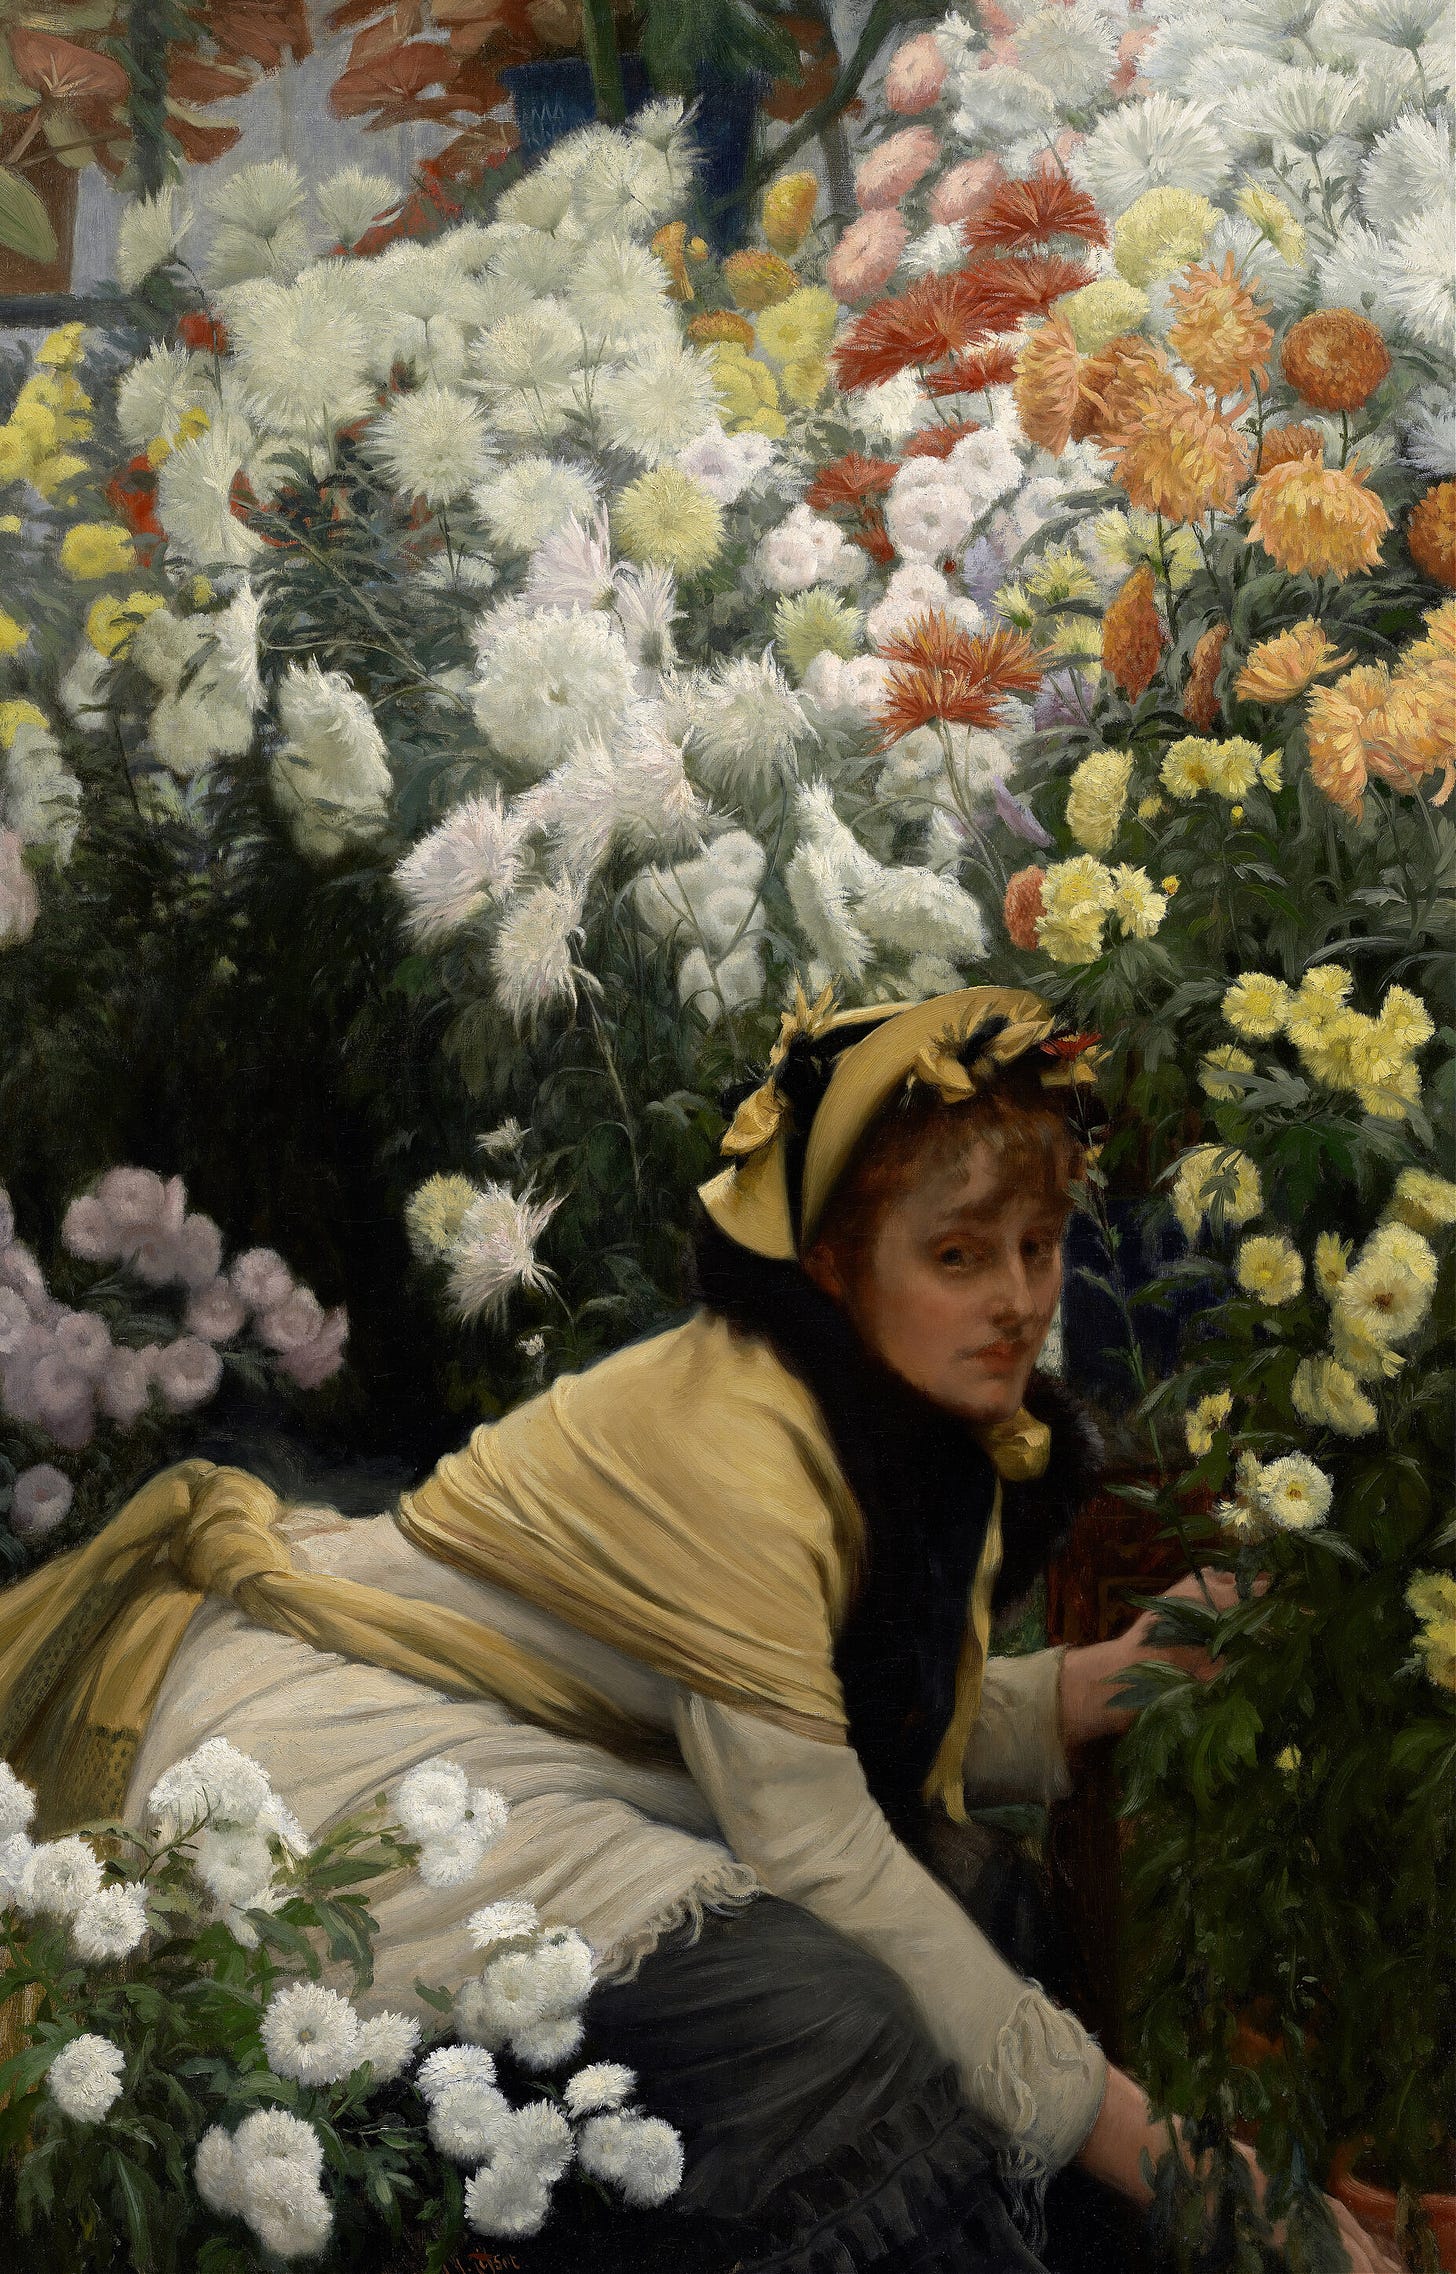 This artwork is a classic by James Tissot.